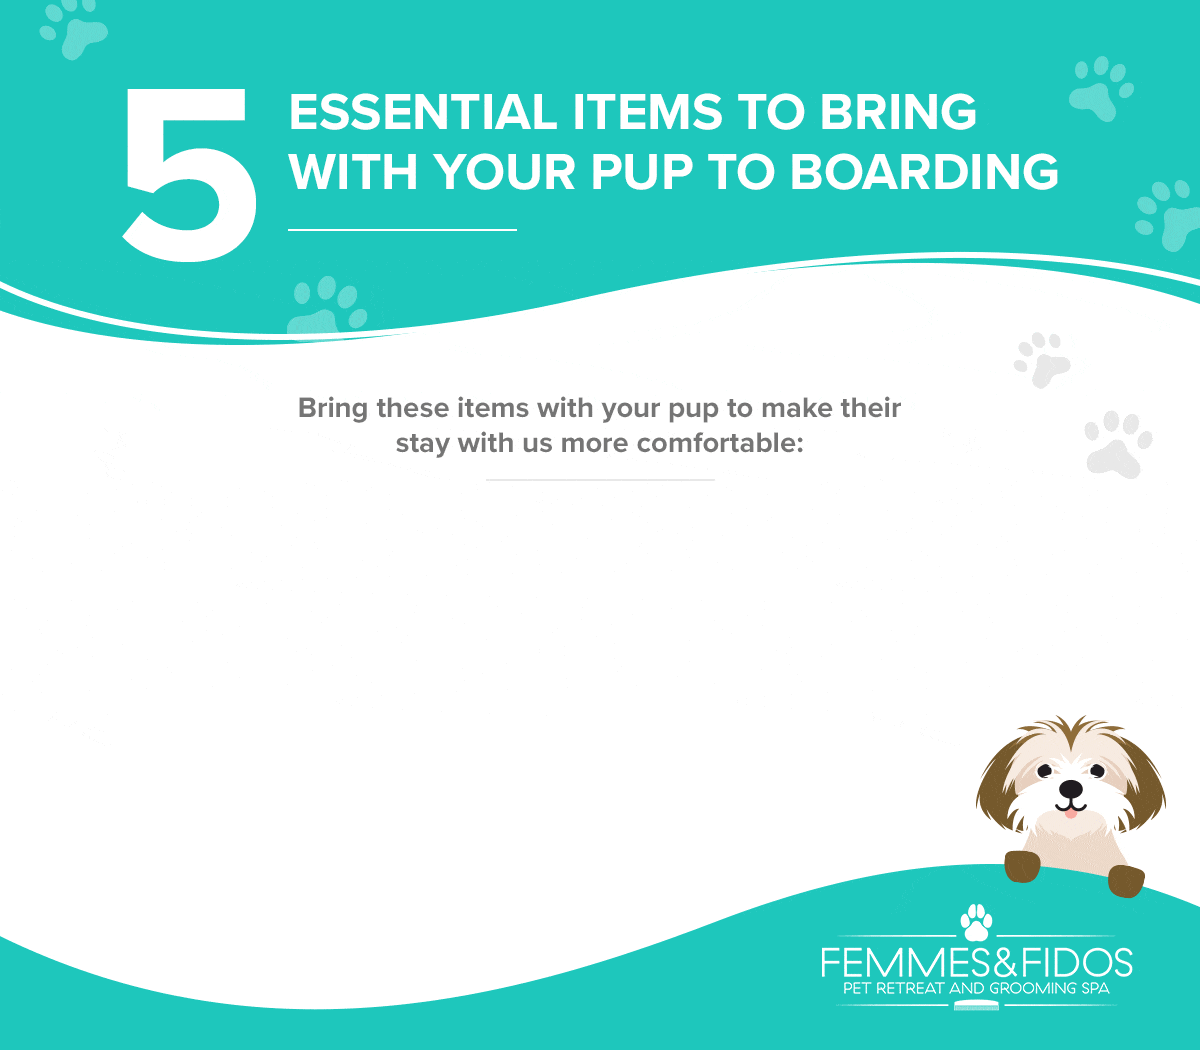 5 Essential Items to Bring With Your Pup to Boarding